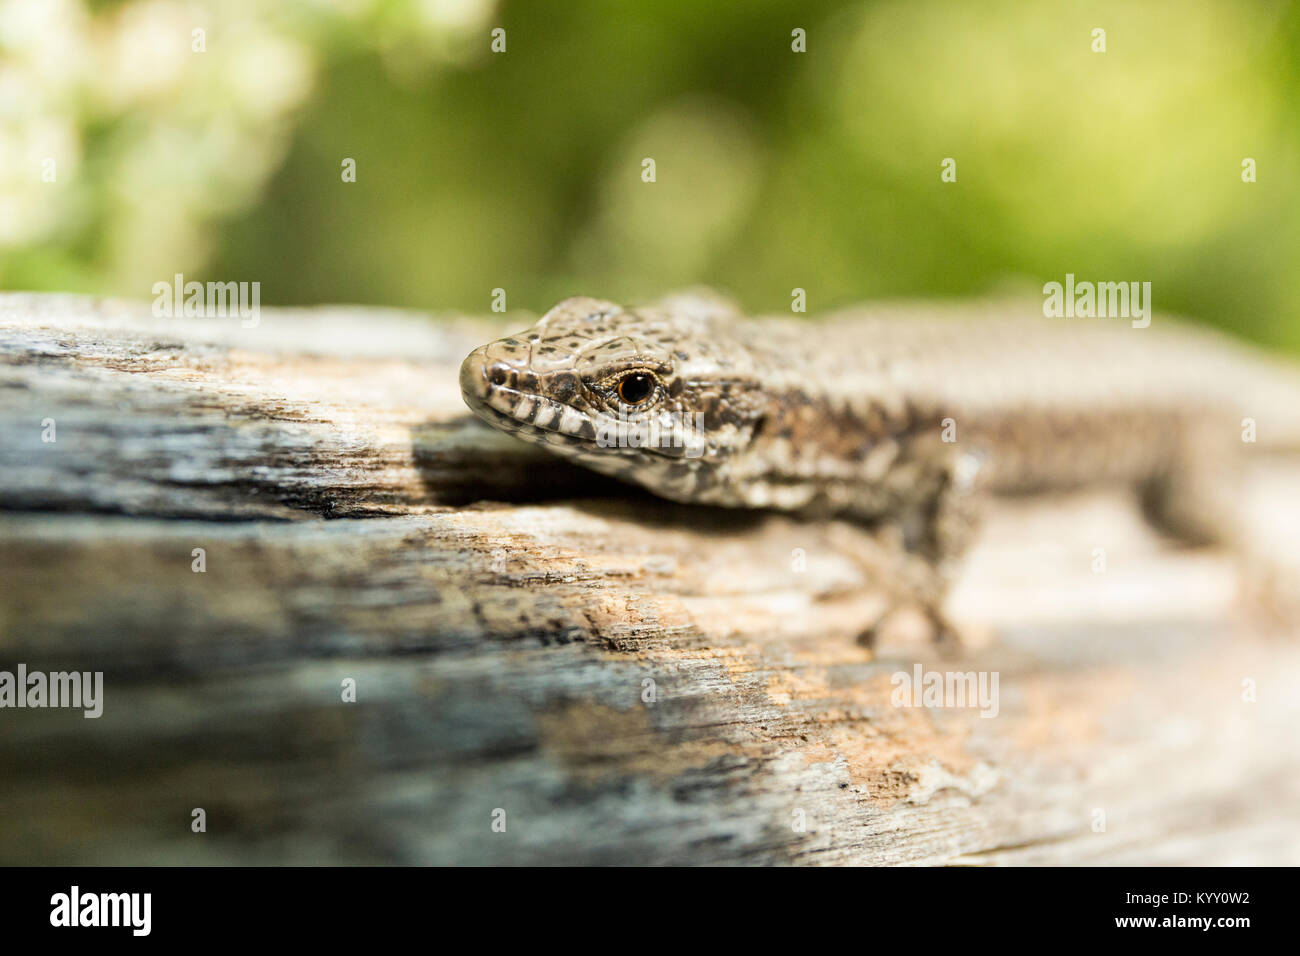 Close-up of lizard on wood Stock Photo